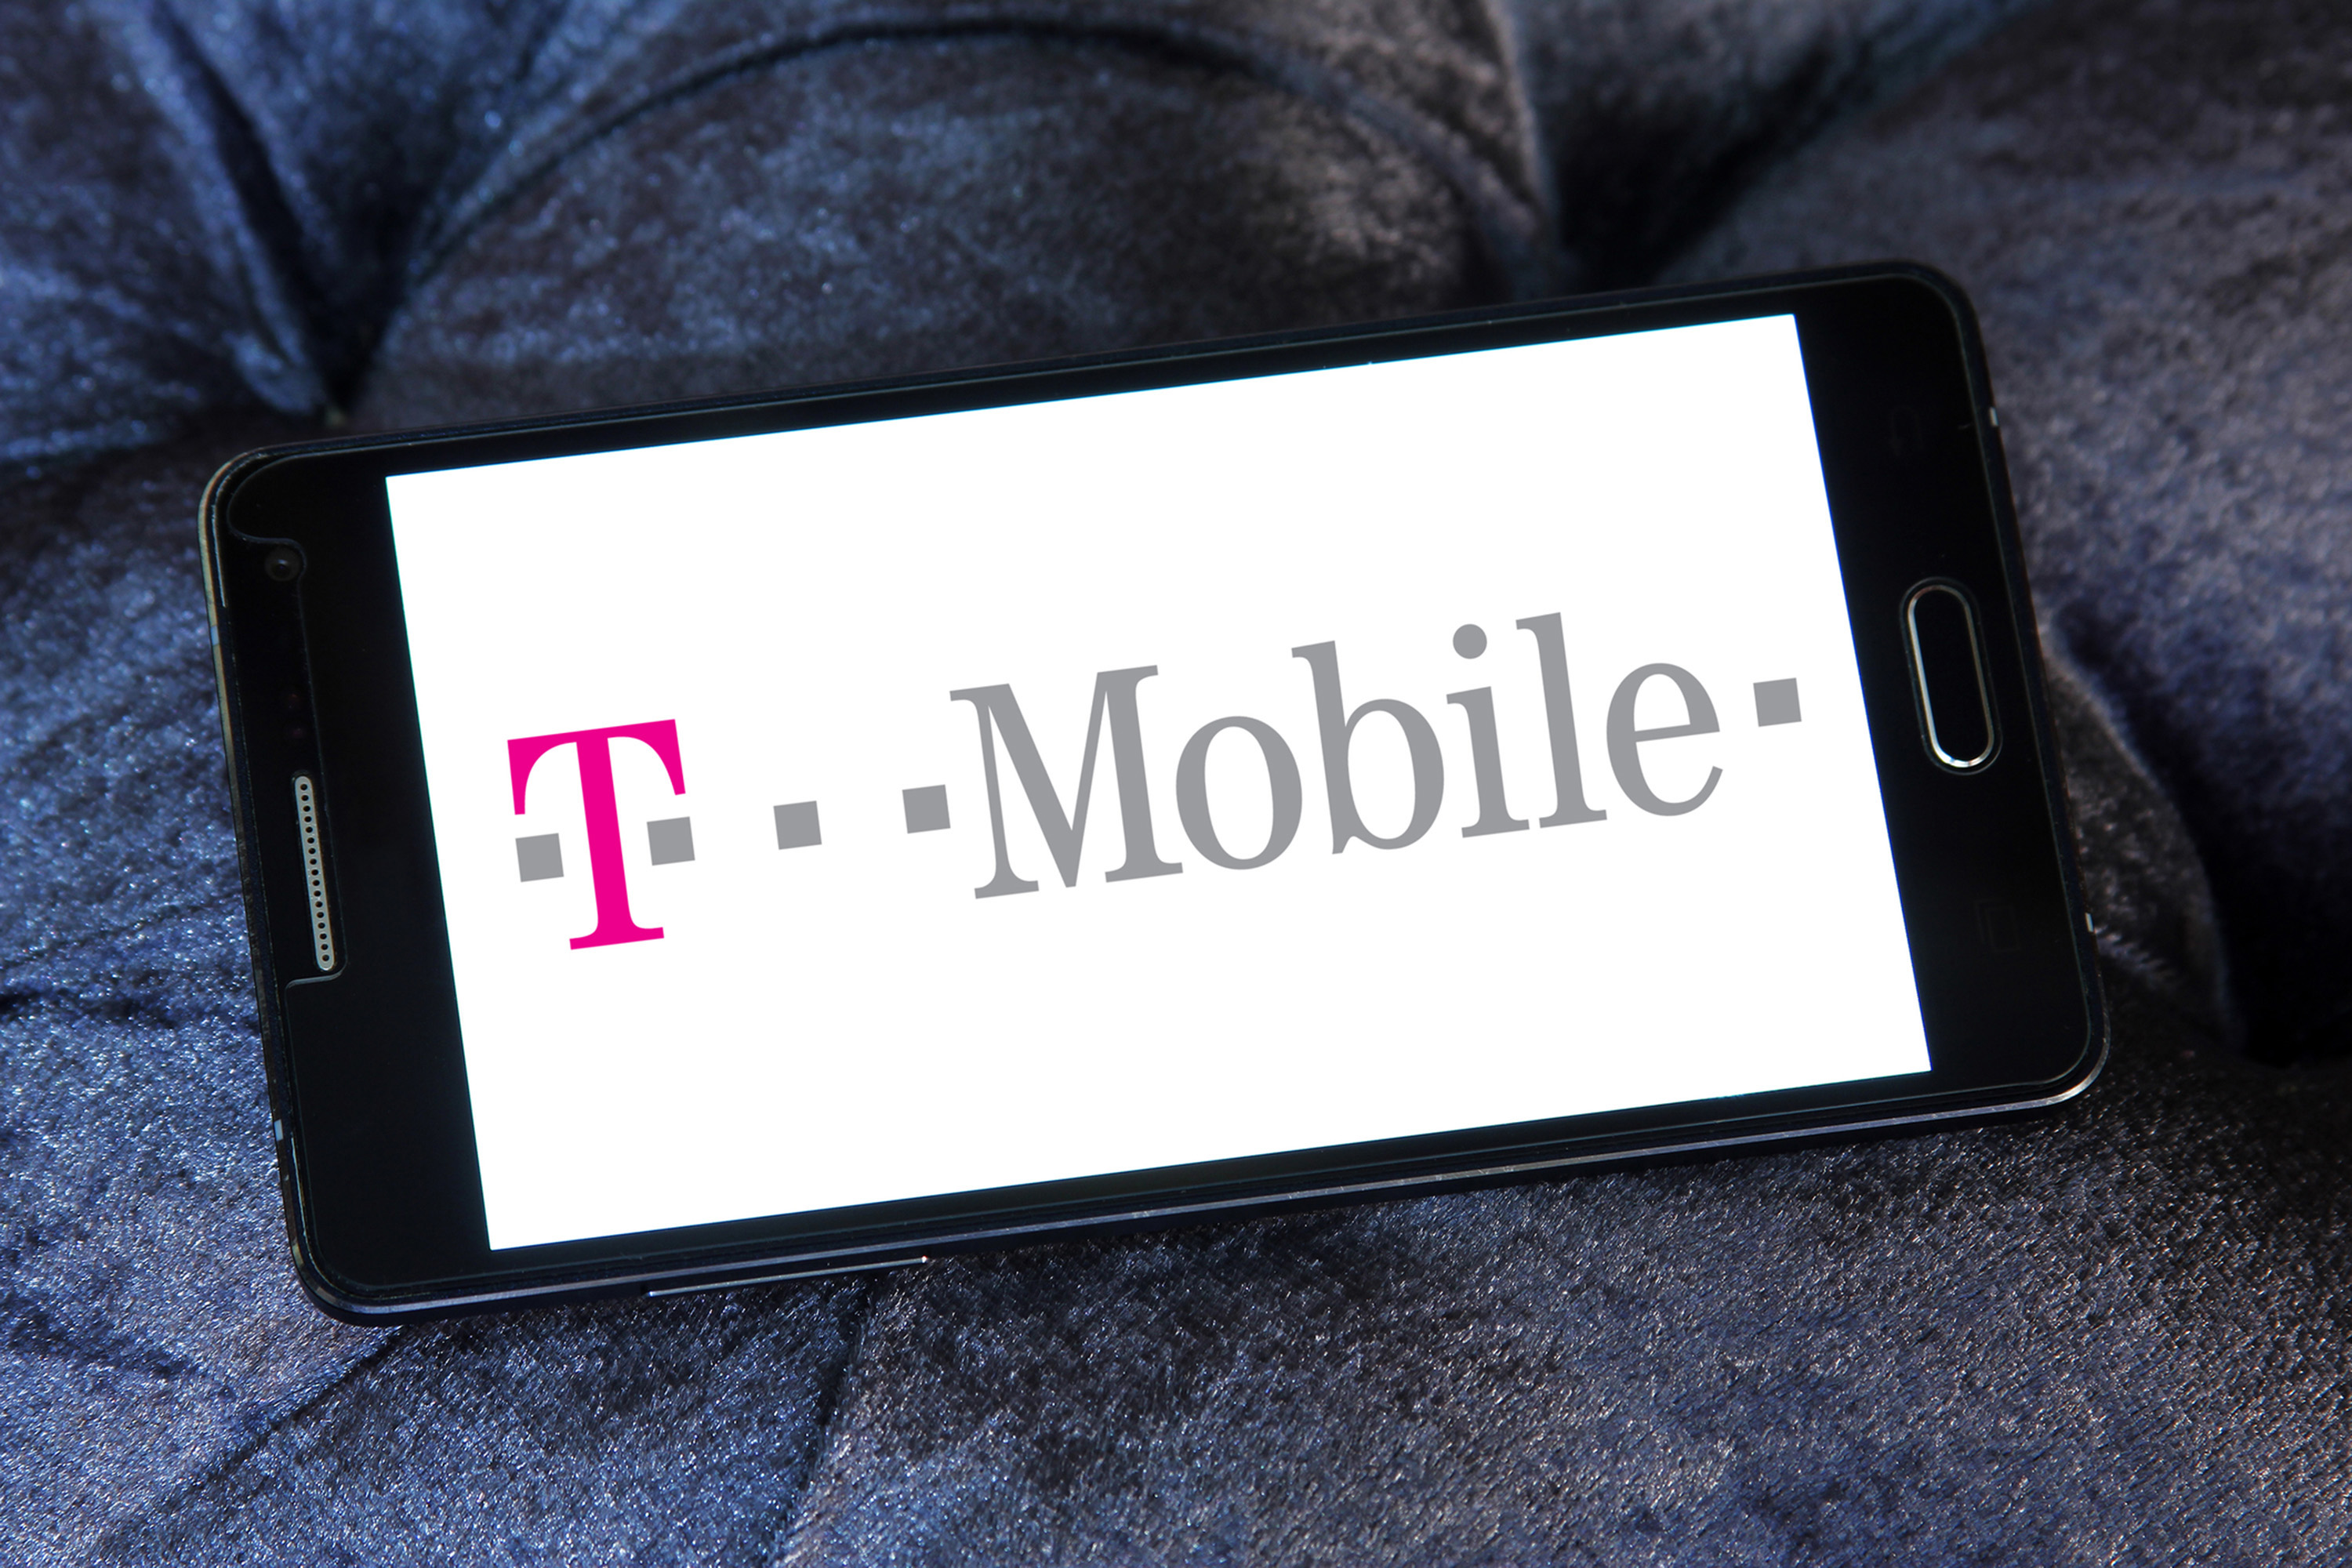 Warrant issued for former T-Mobile employee, accused of opening accounts and stealing phones